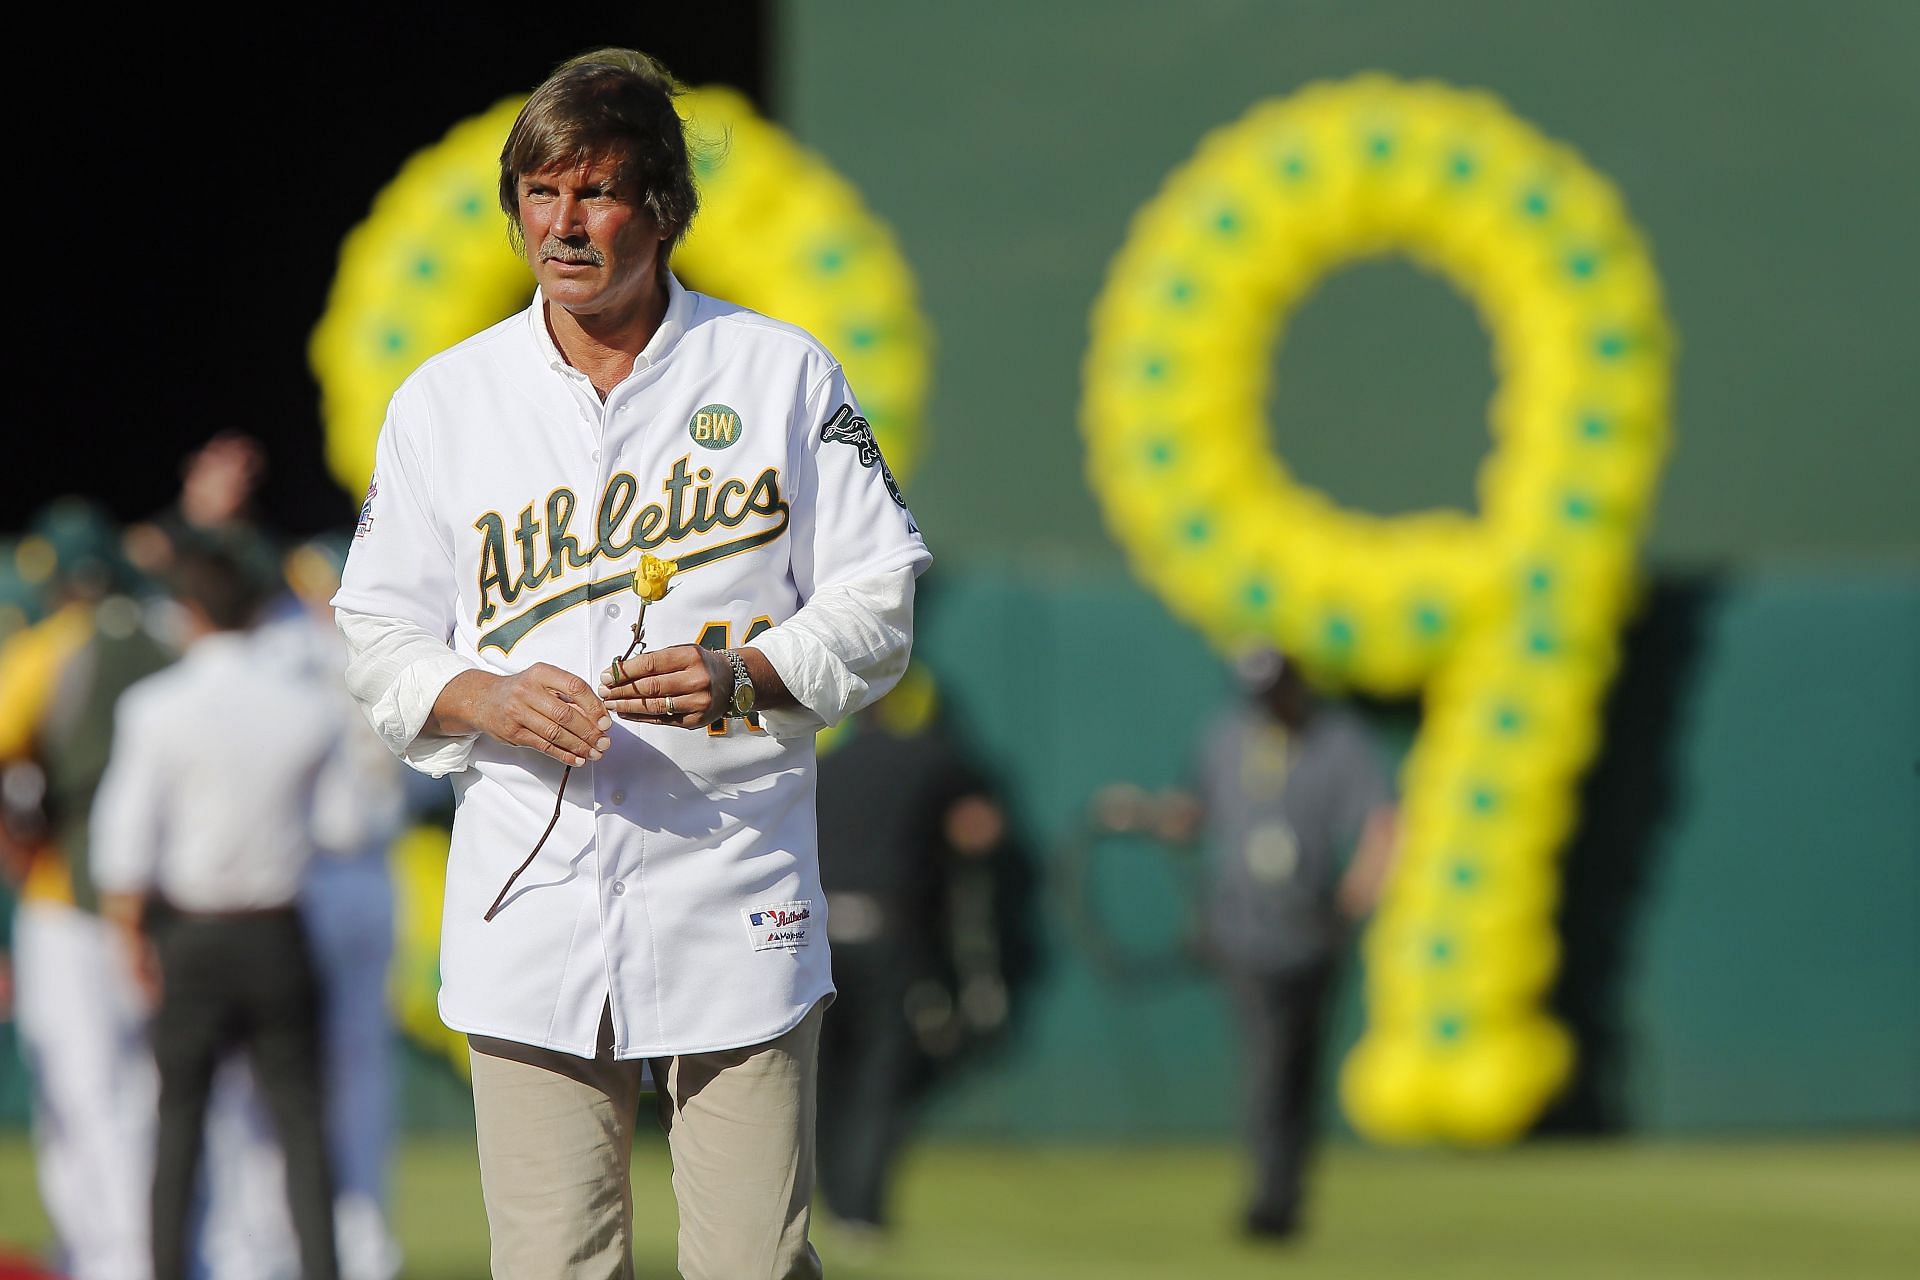 When Dennis Eckersley's daughter expressed grief for being shunned by her  father